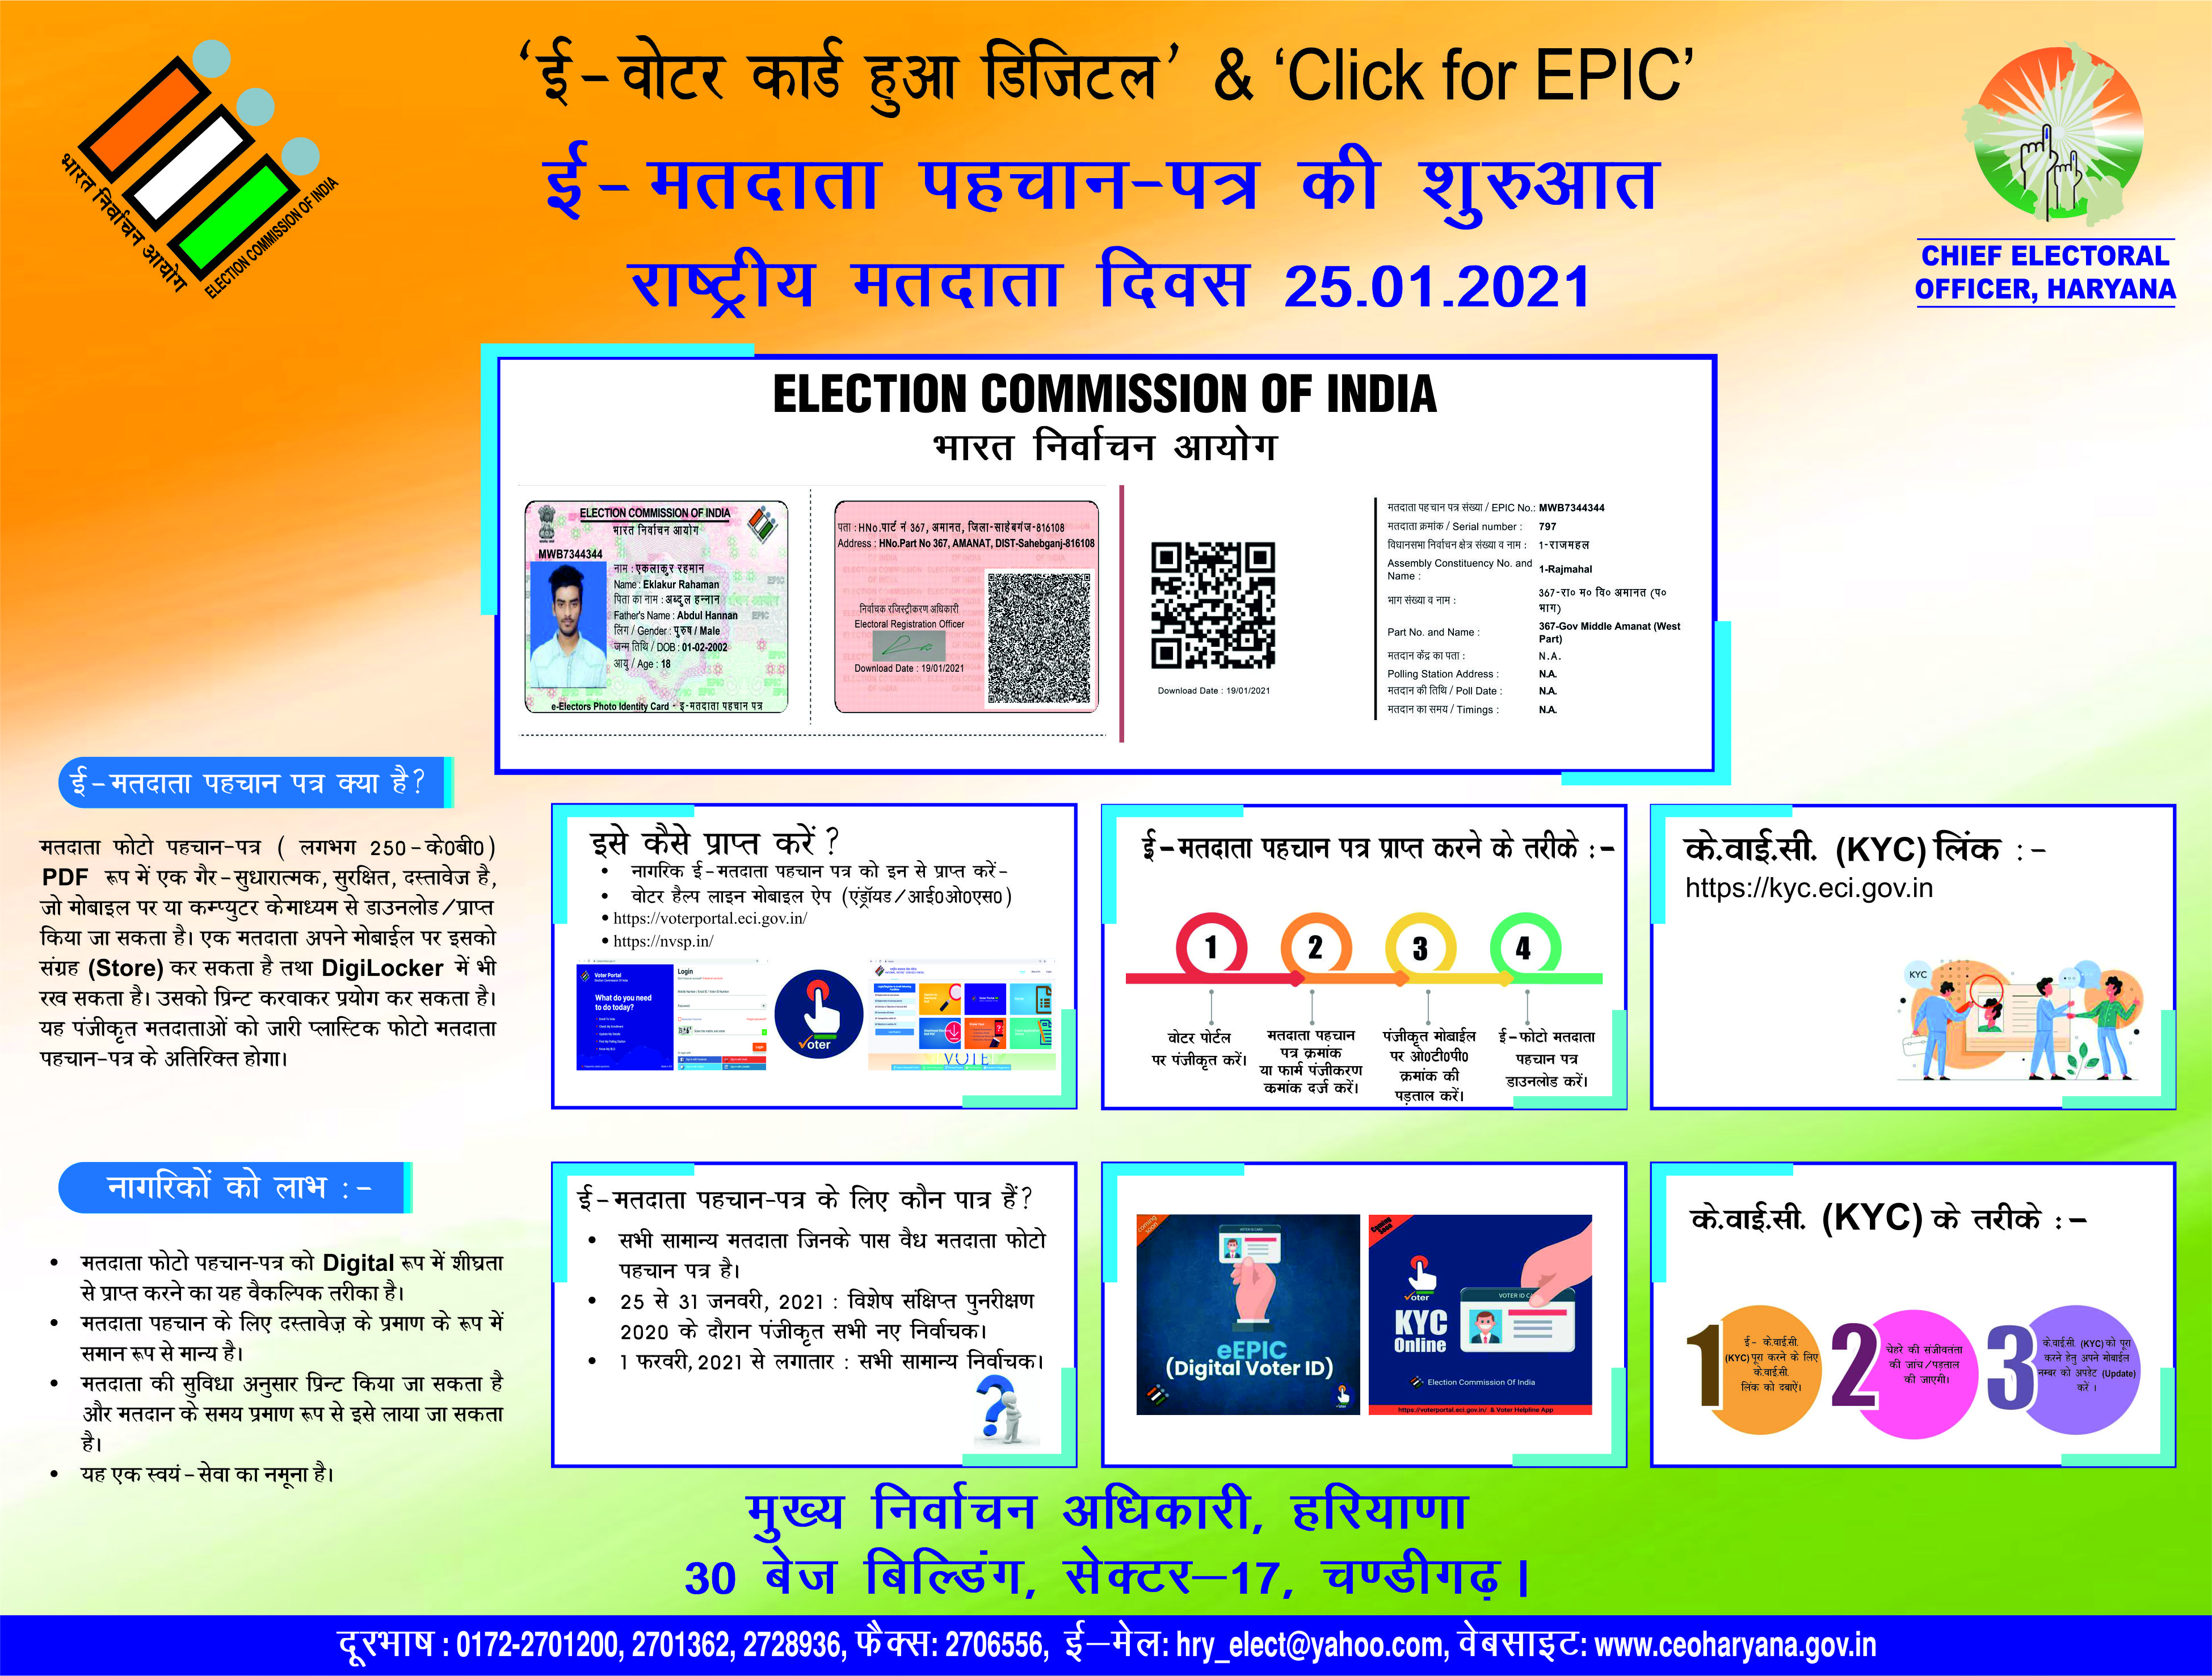 Advertisements in various newpapers in Hindi